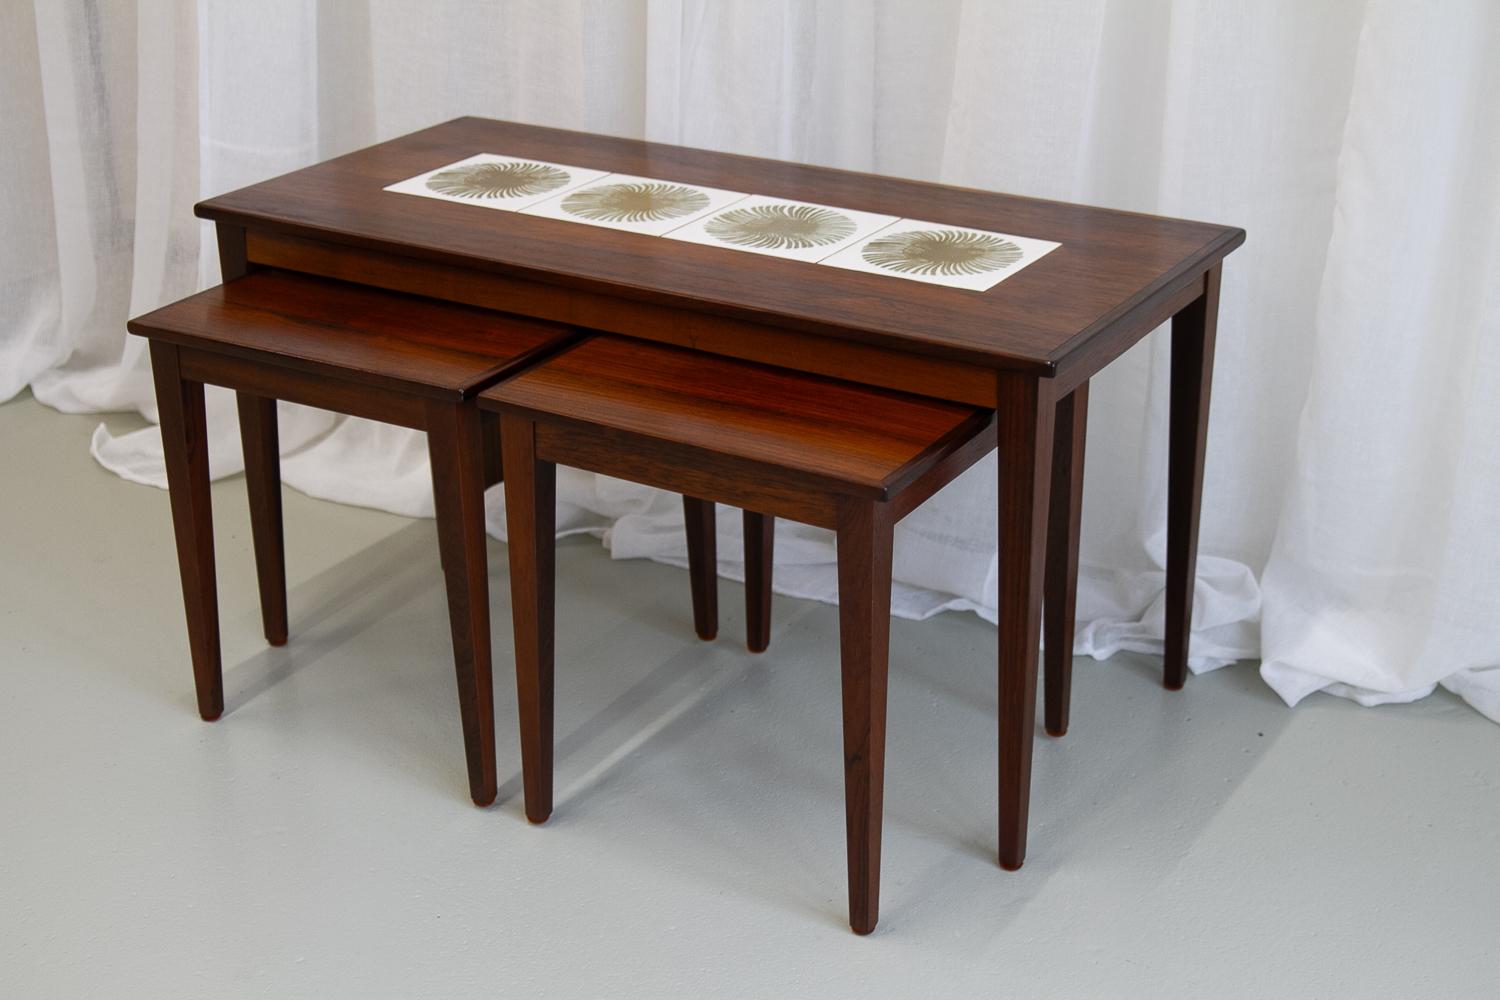 Danish Modern Rosewood & Ceramic Tile Nesting Tables, 1960s, Set of 3.
Nest of three rosewood tables by Kvalitet, Form & Funktion, Denmark. One large table, and two identical smaller tables that fit under the large one. The large table features four